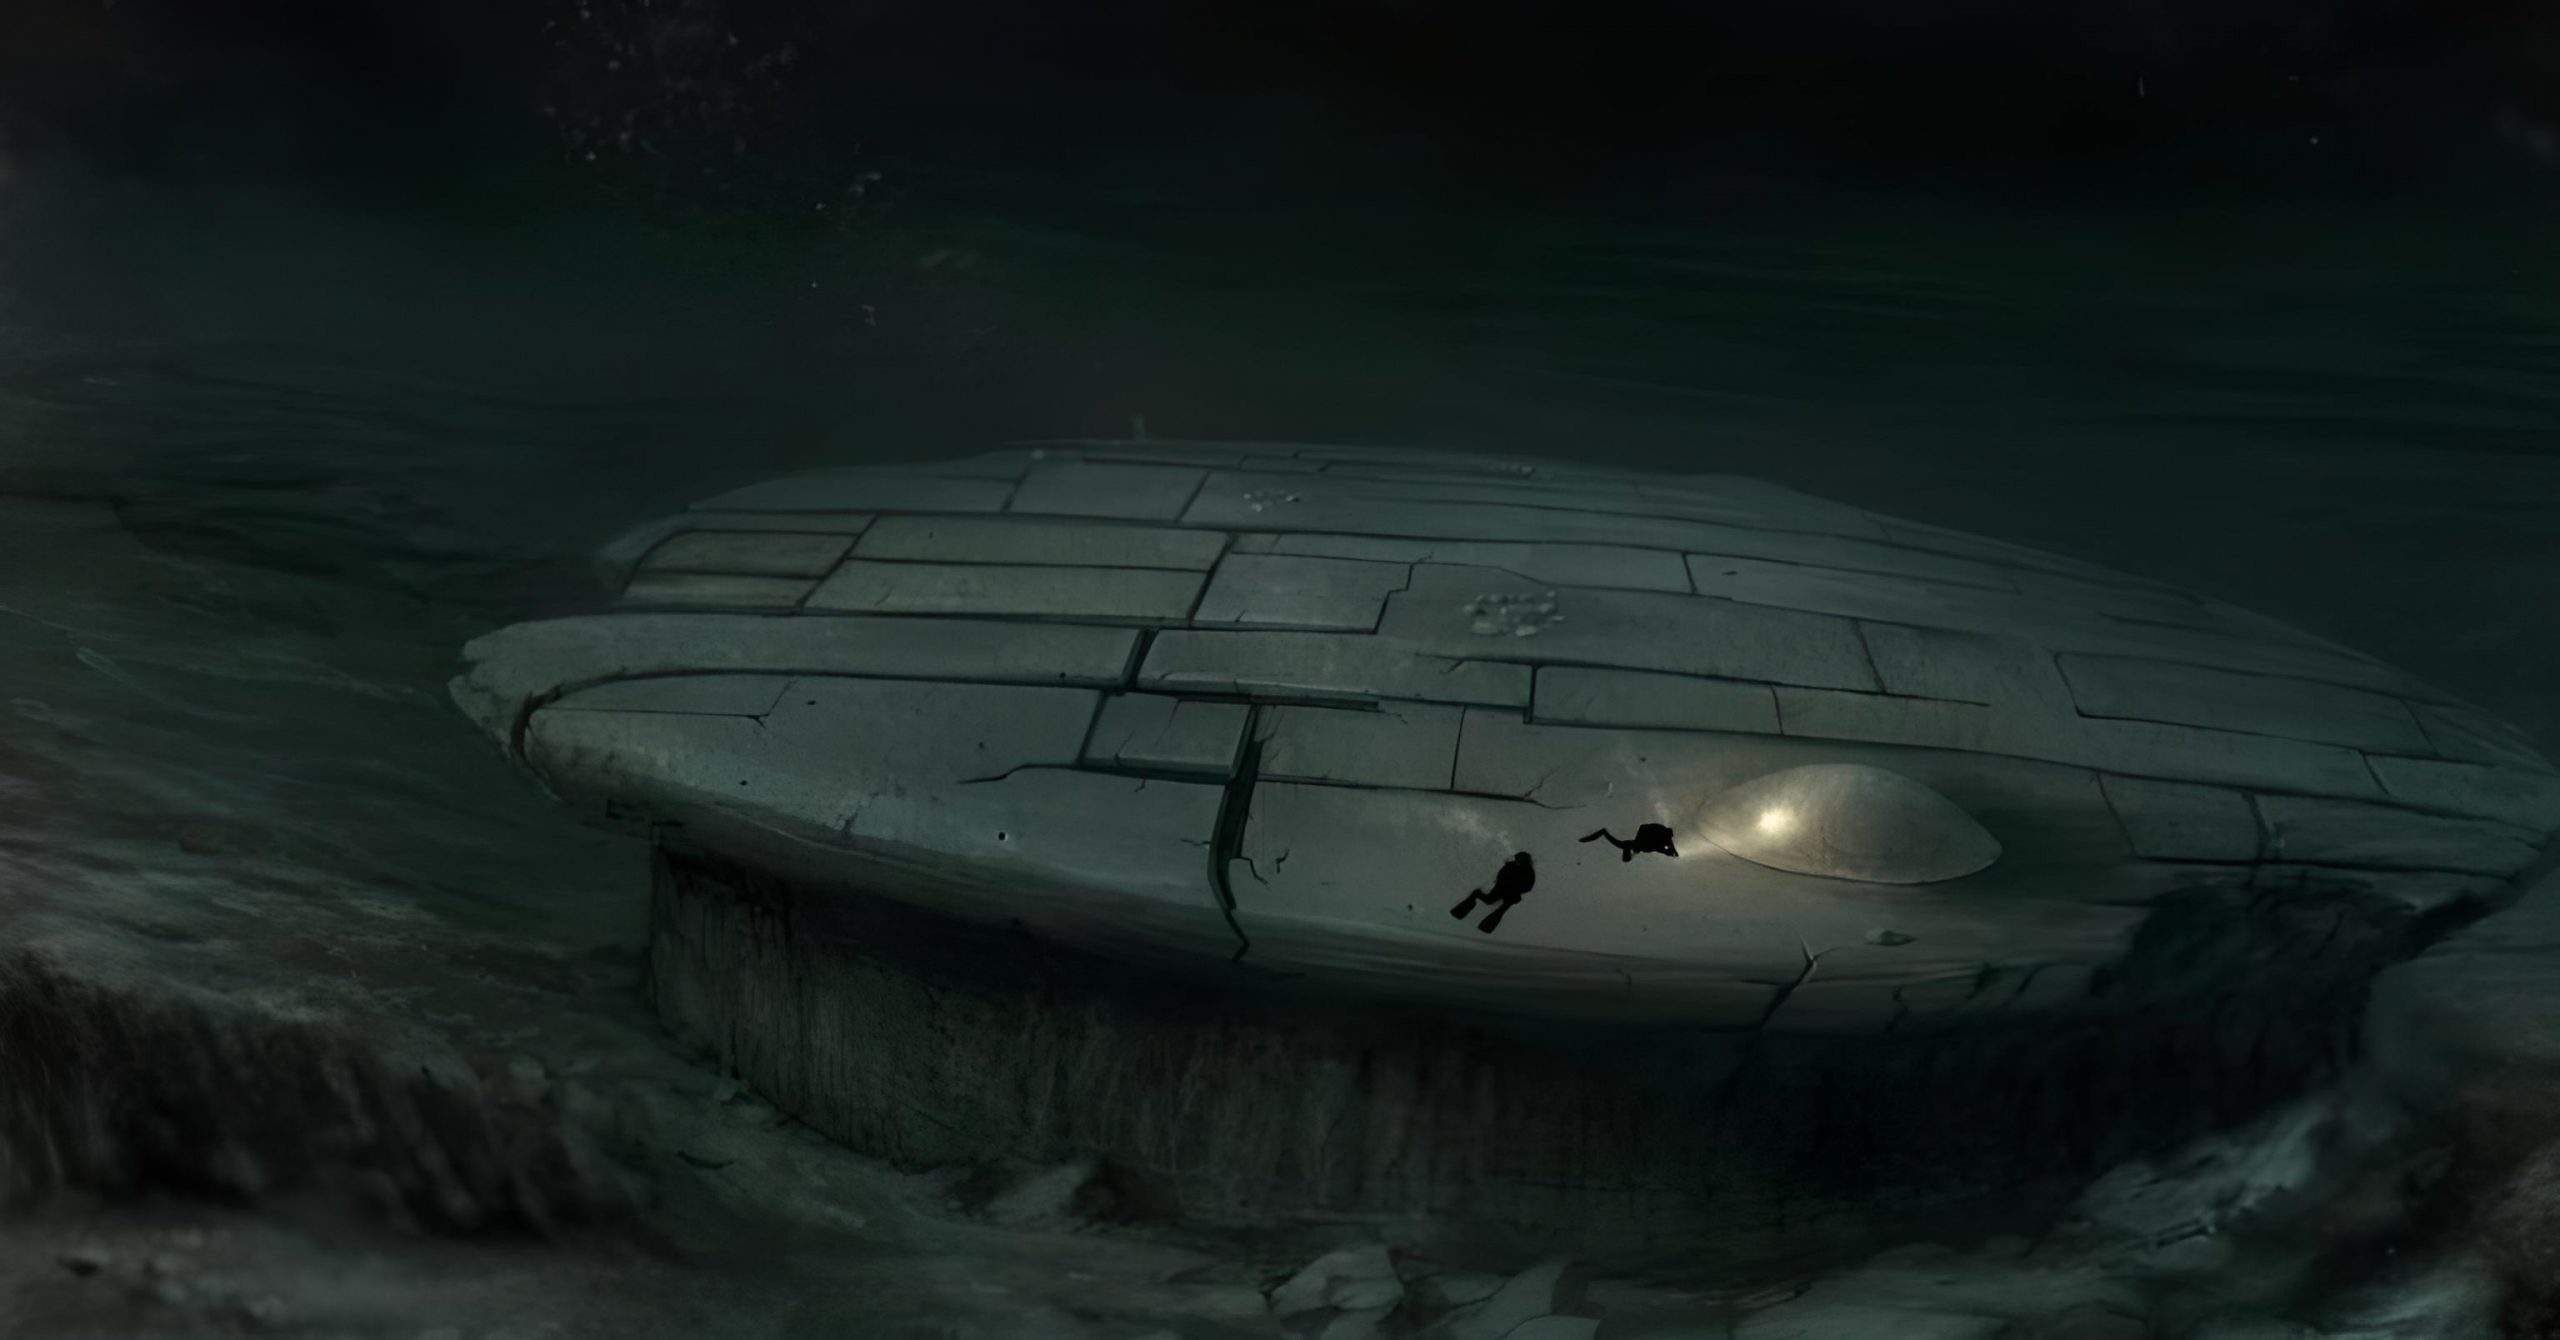 baltic sea anomaly actual picture